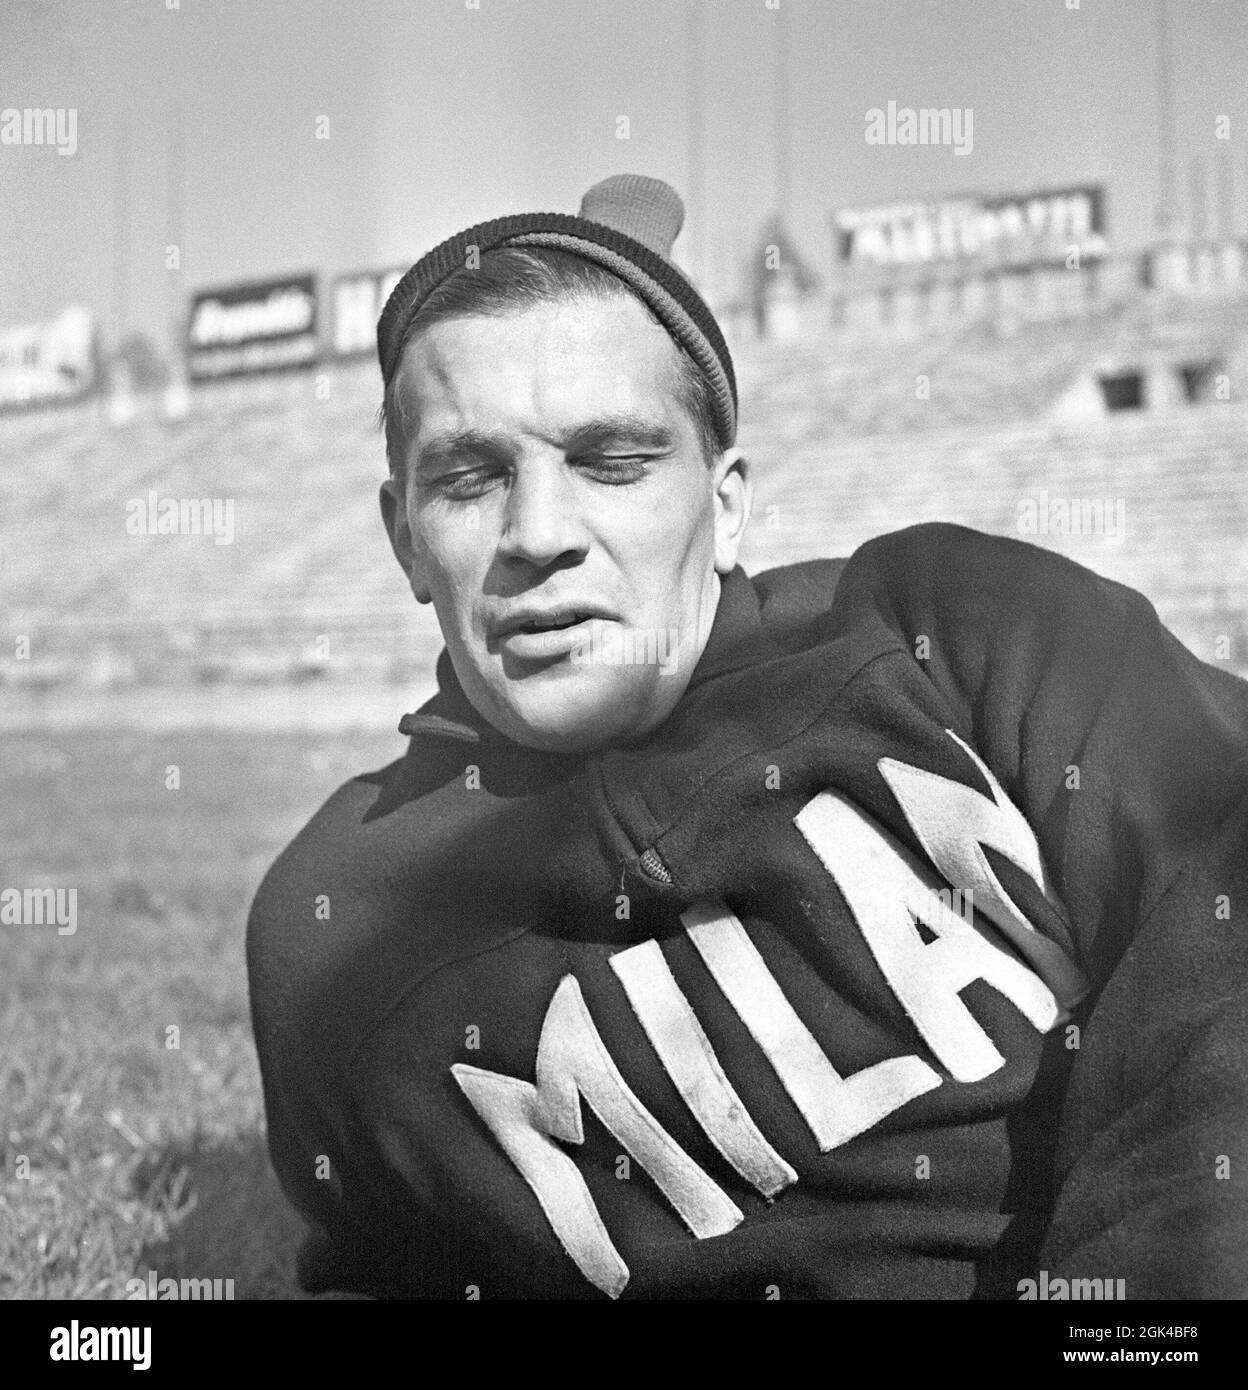 Gunnar Nordahl. 19 october 1921 - 15 september 1995. Swedish football player, best known for playing in the italian football club AC Milan from 1949 to 1956. He stills holds the record for goals per appearance in Italy. Nordahl is considered to be one of the greatest Swedish football players of all-time. Nordahl became the first swedish professional footballplayer when transfereed to AC Milan on january 22 1949. Later, he would team up with his national team strike partners, Gunnar Gren and Nils Liedholm to form the renowned Gre-No-Li trio, a succesful trio playing together for AC Milan.  Mila Stock Photo